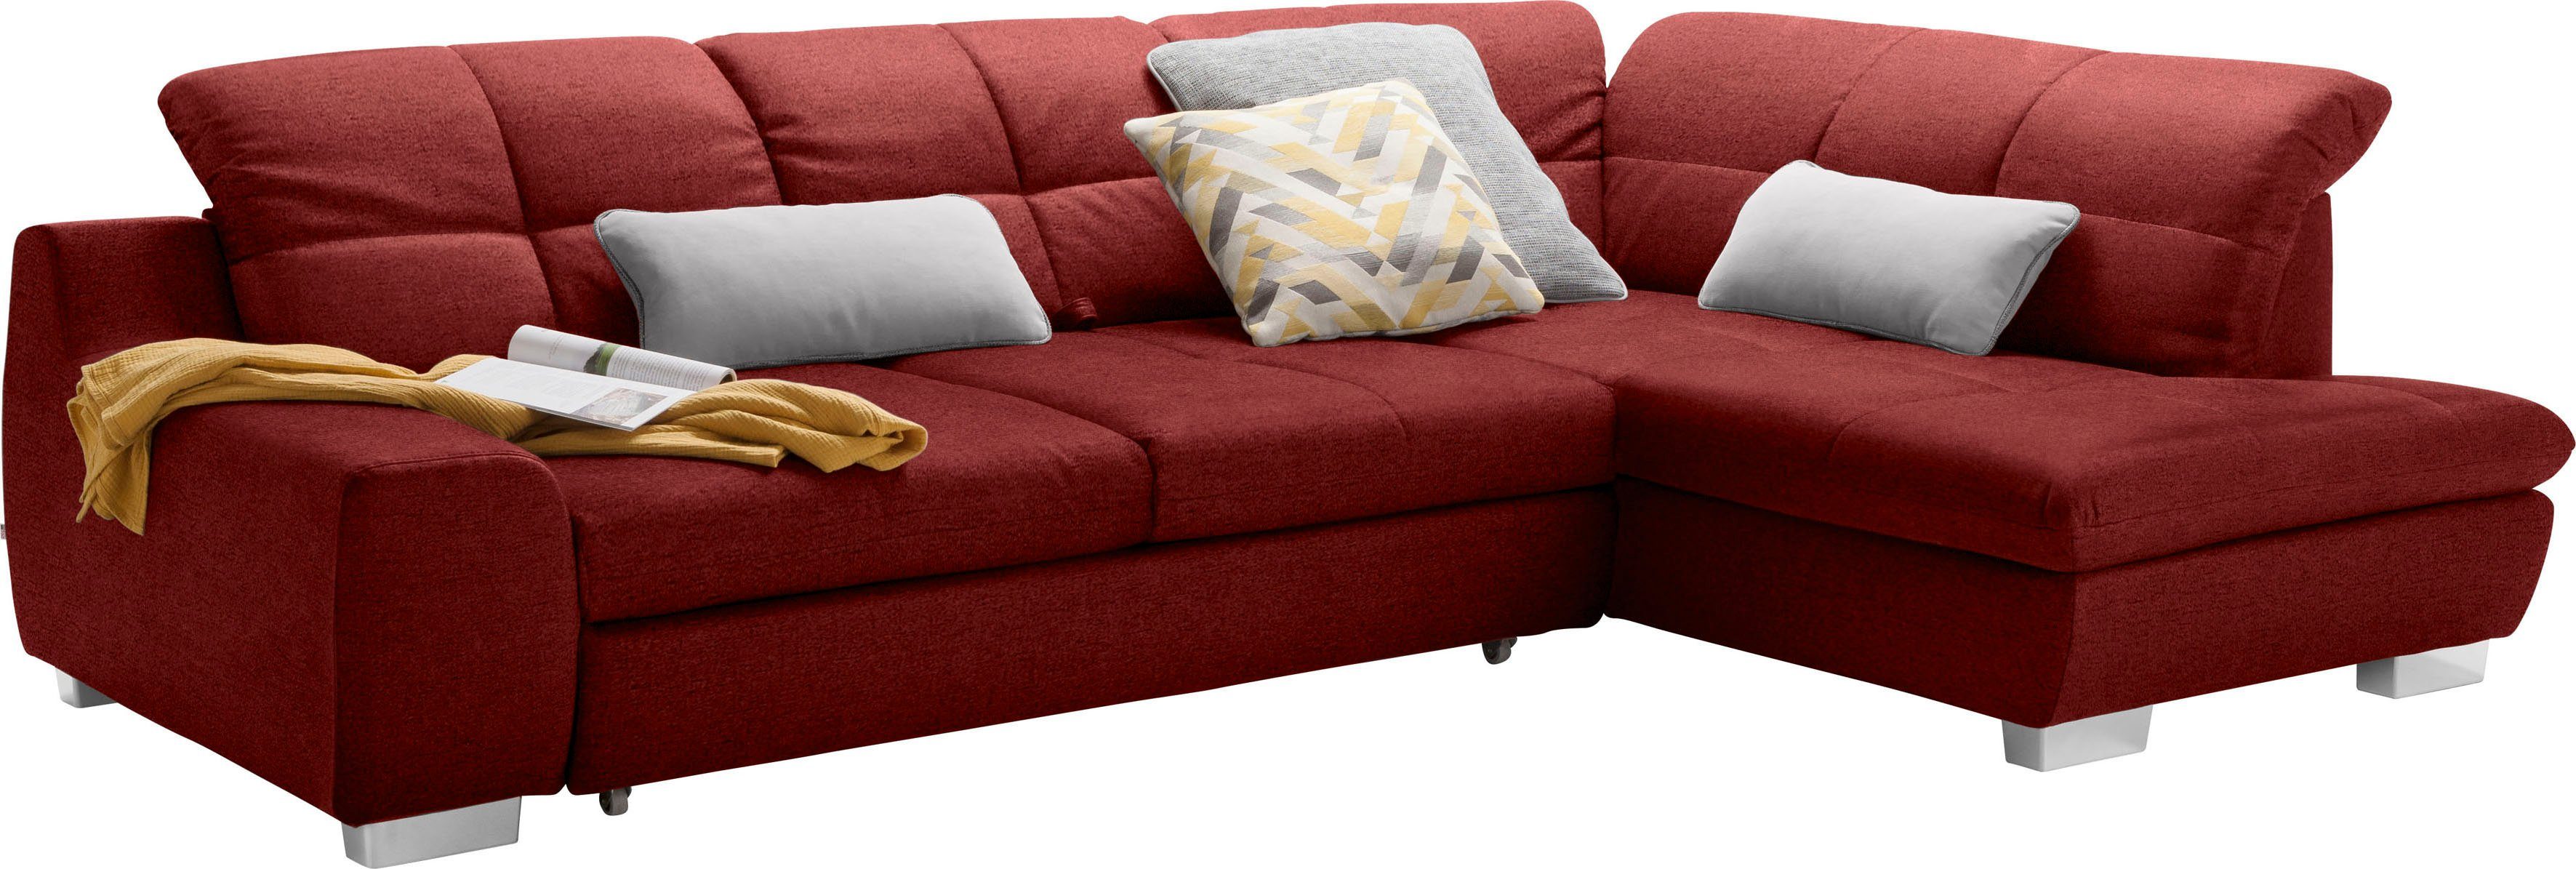 set one by Musterring SO wahlweise Ecksofa mit Bettfunktion 1200